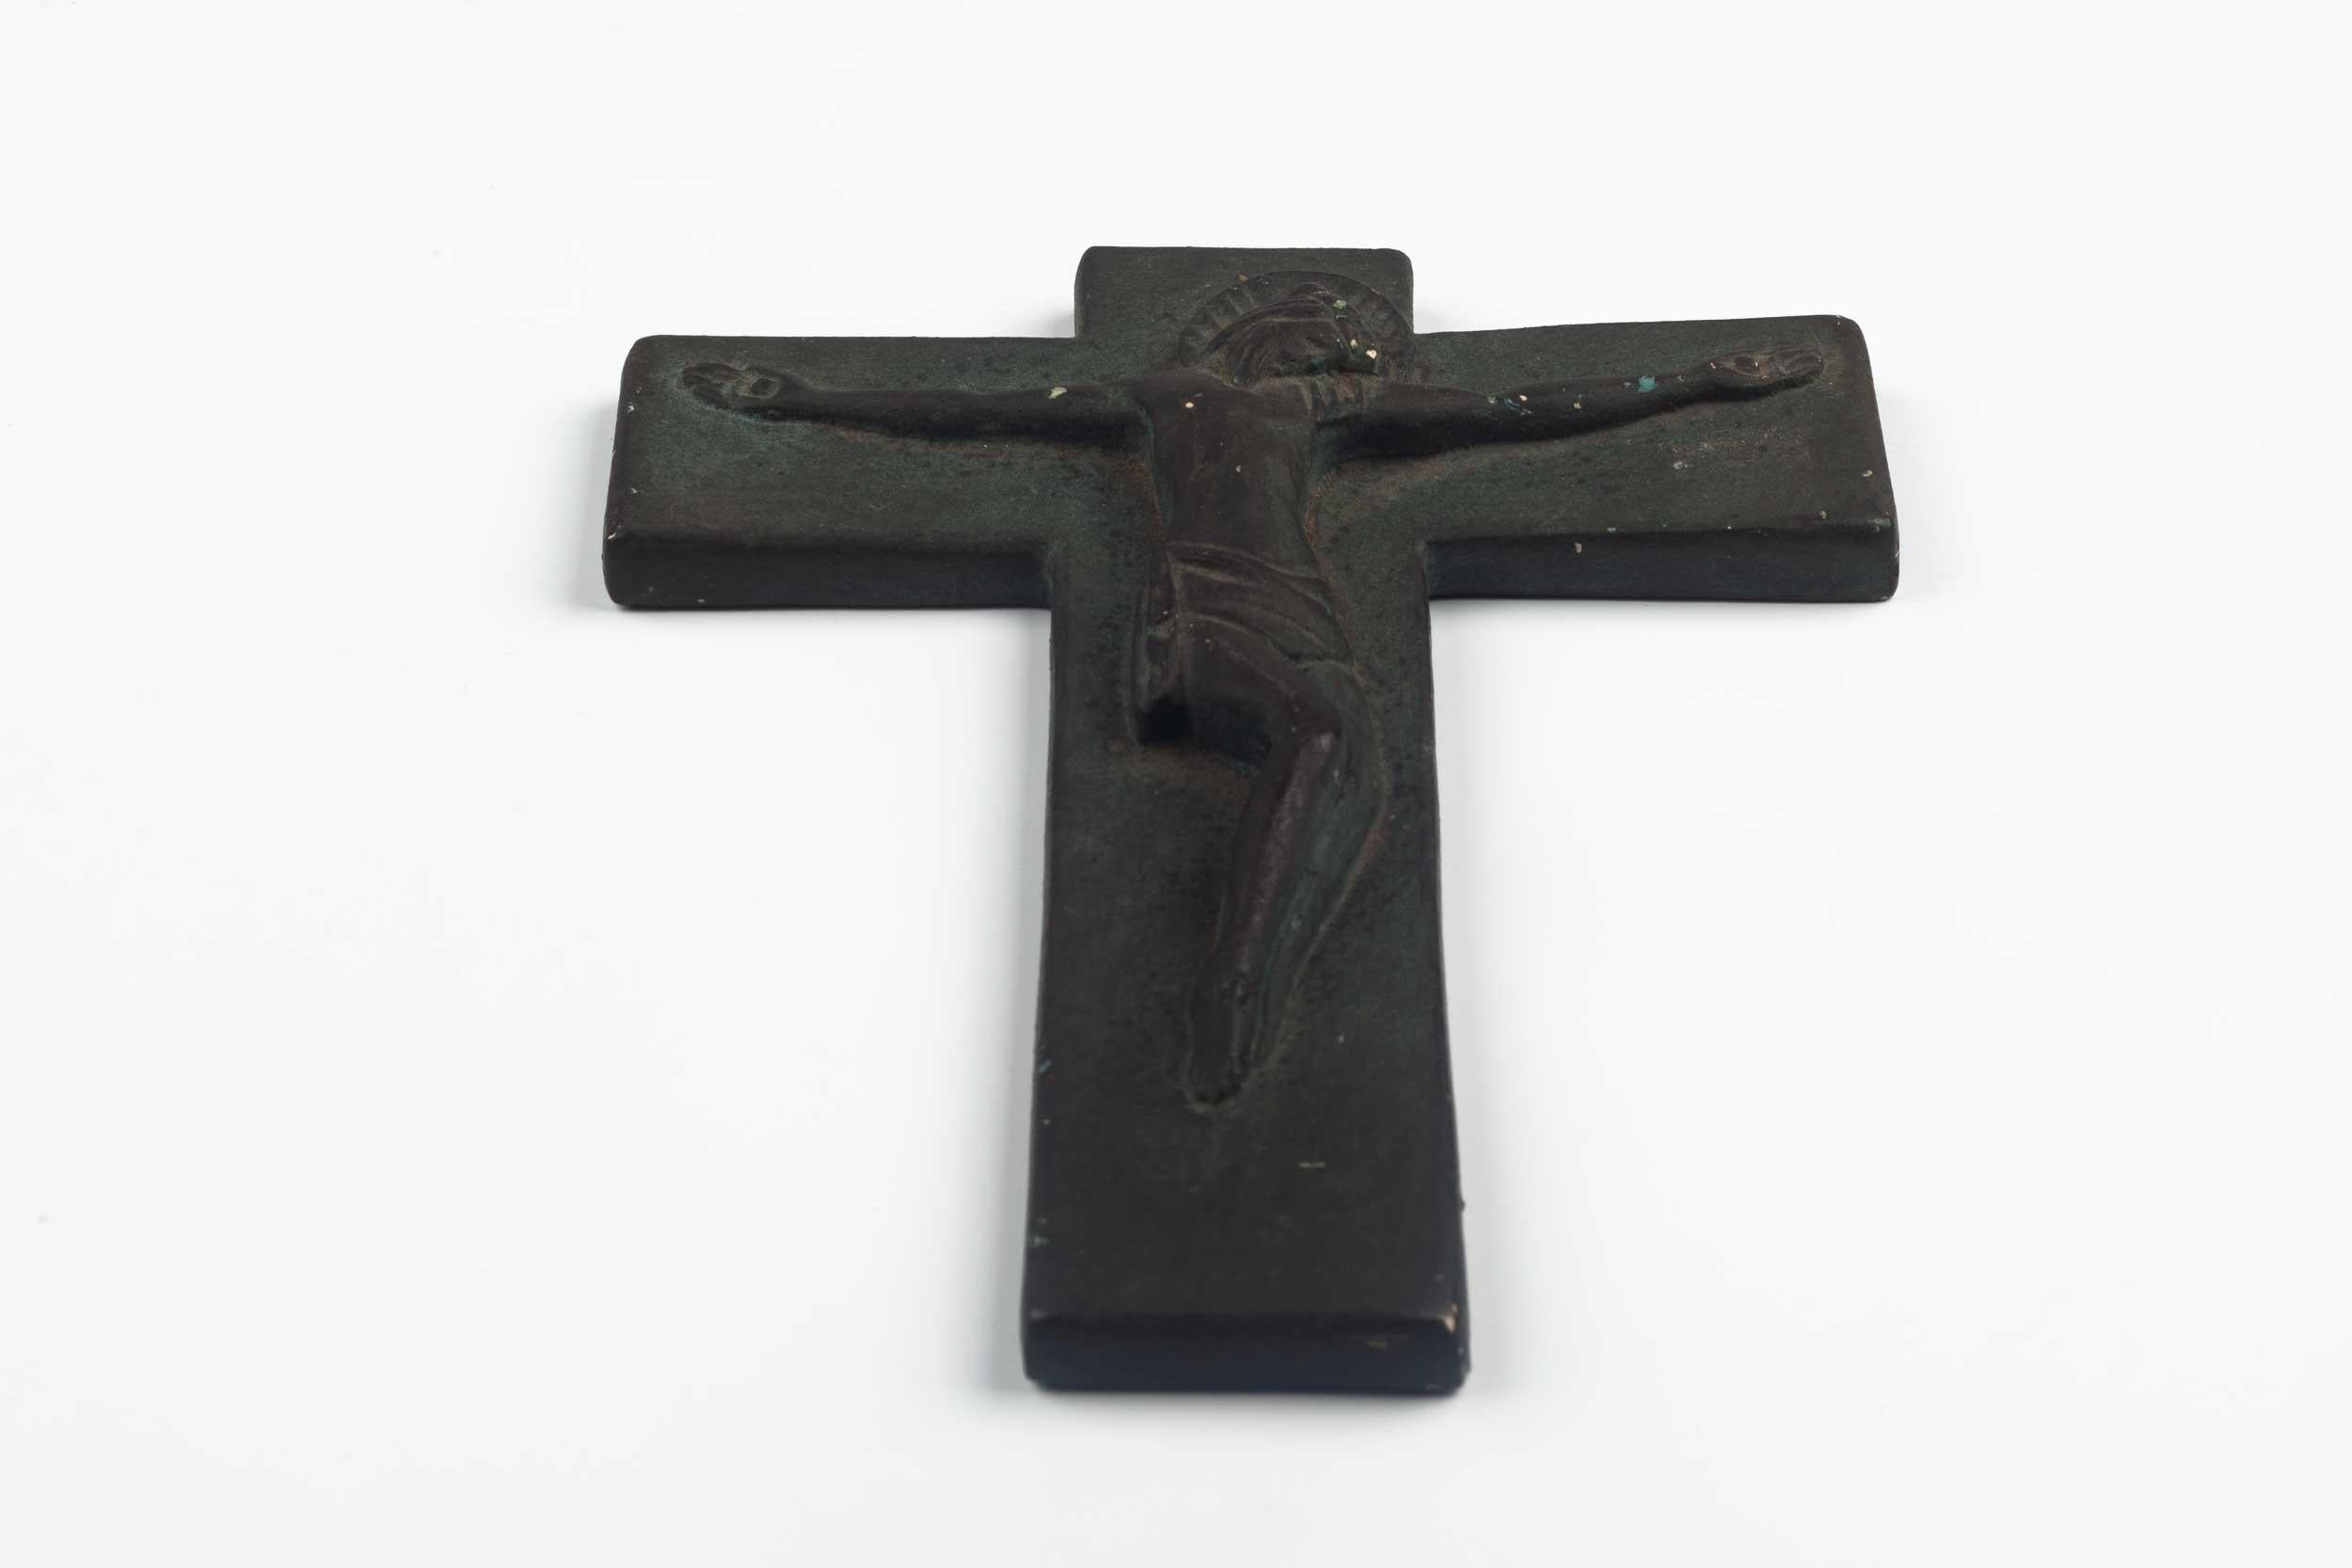 European Ceramic Wall Cross, 1970s In Good Condition For Sale In Chicago, IL